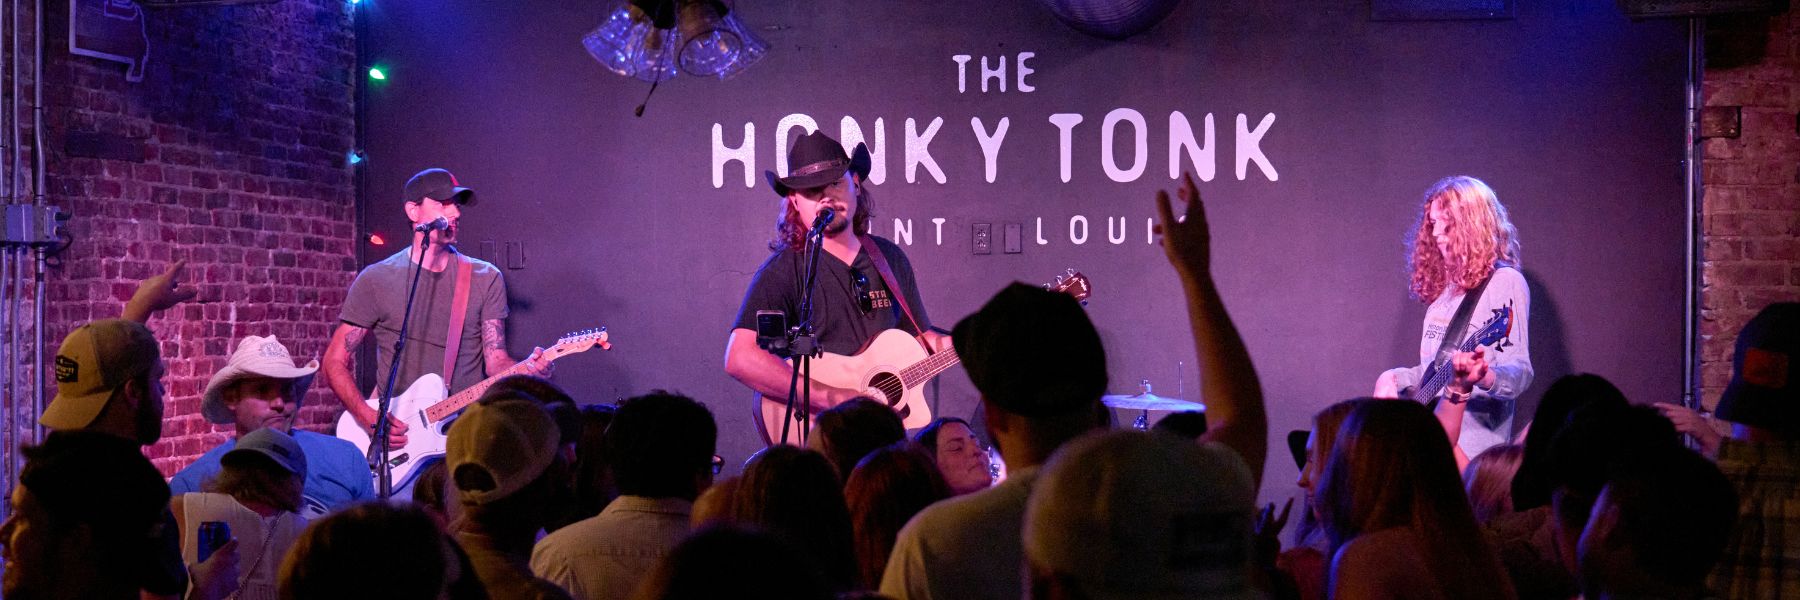 Country music plays at The Honky Tonk in downtown St. Louis.